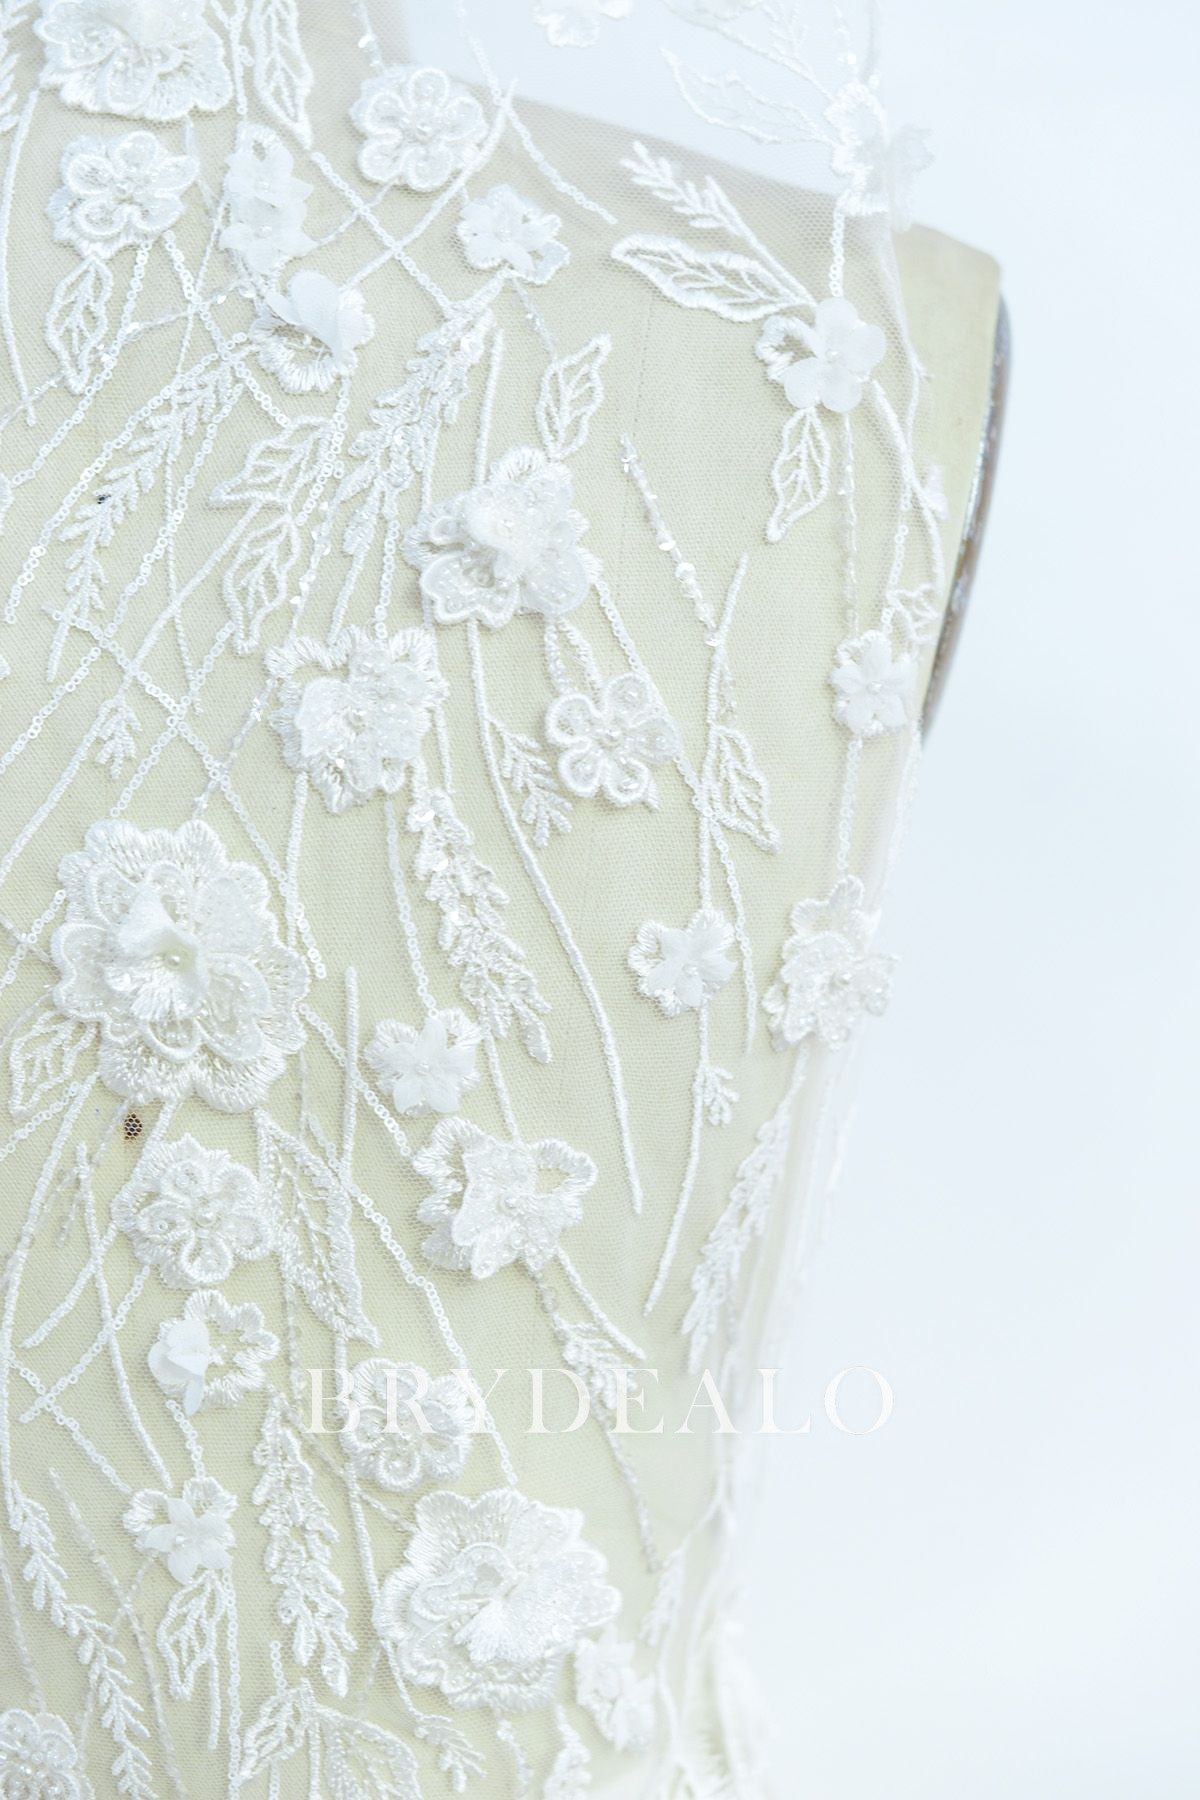 Shimmery Beaded 3D Flower Bridal Lace Fabric for Sale